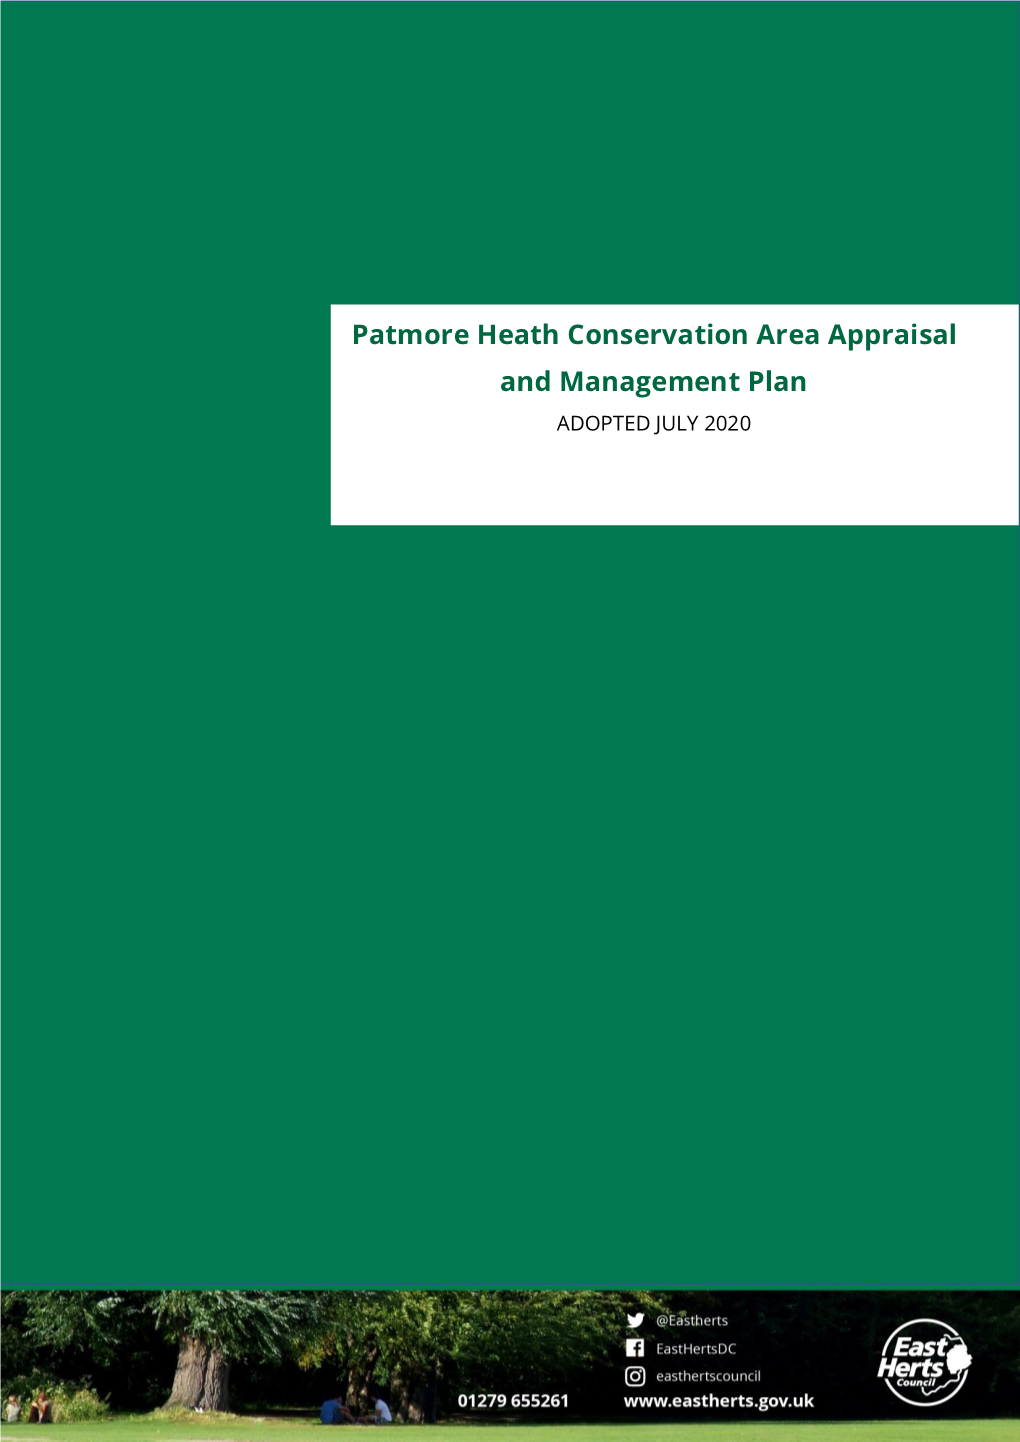 Patmore Heath Conservation Area Appraisal and Management Plan ADOPTED JULY 2020